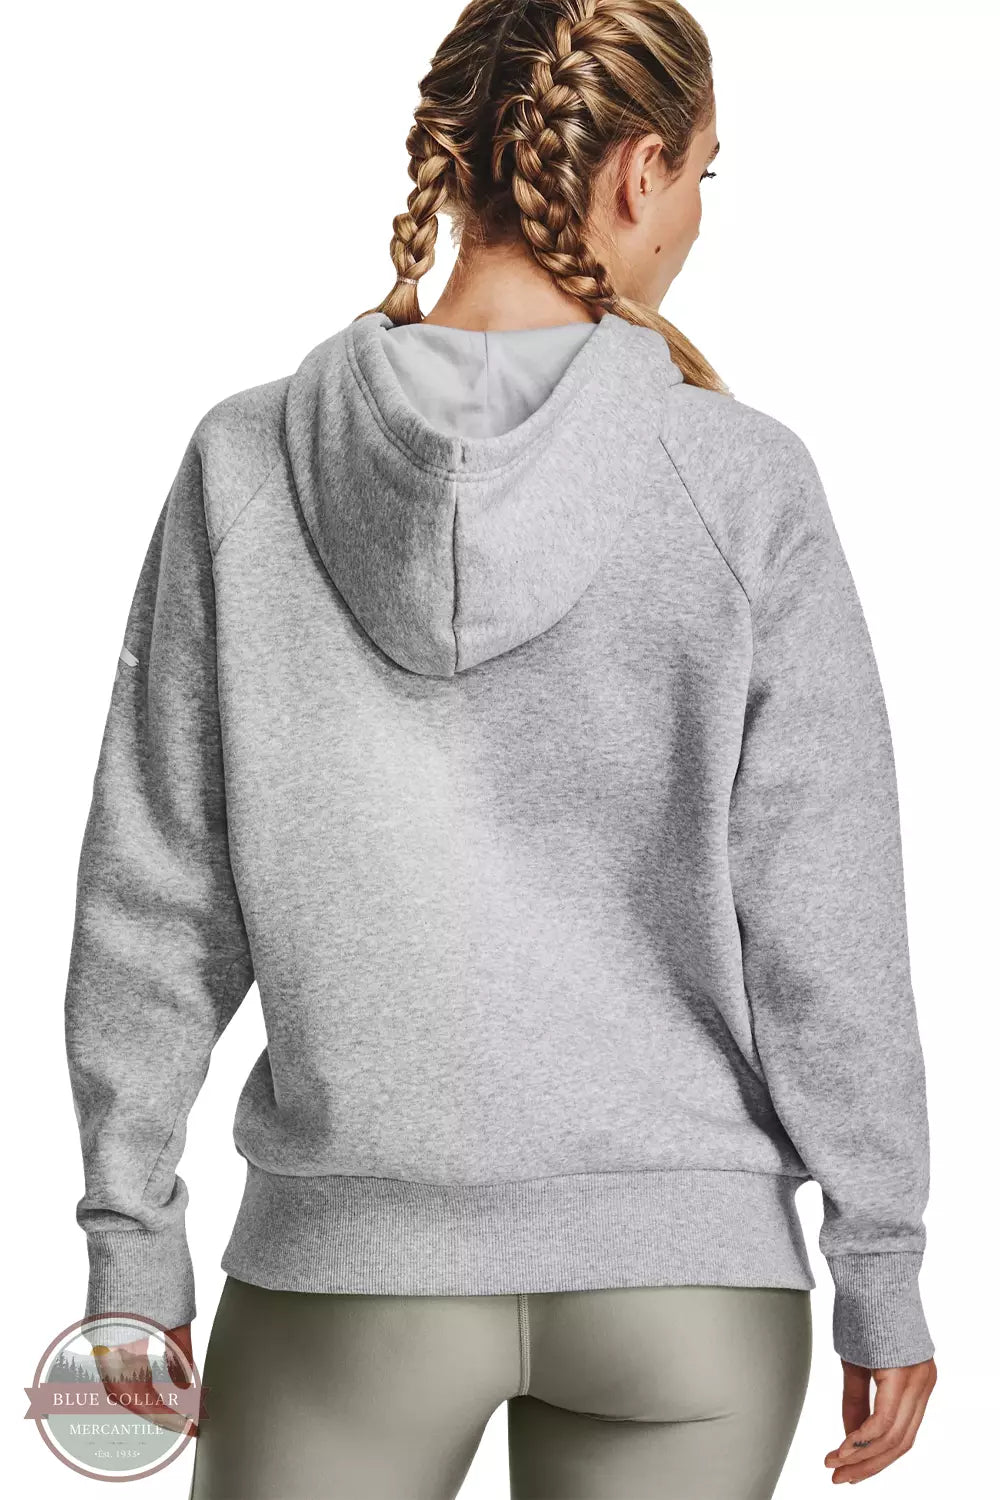 Under Armour 1379609-012 Rival Fleece Graphic Hoodie in Mod Gray Light Heather/White Back View